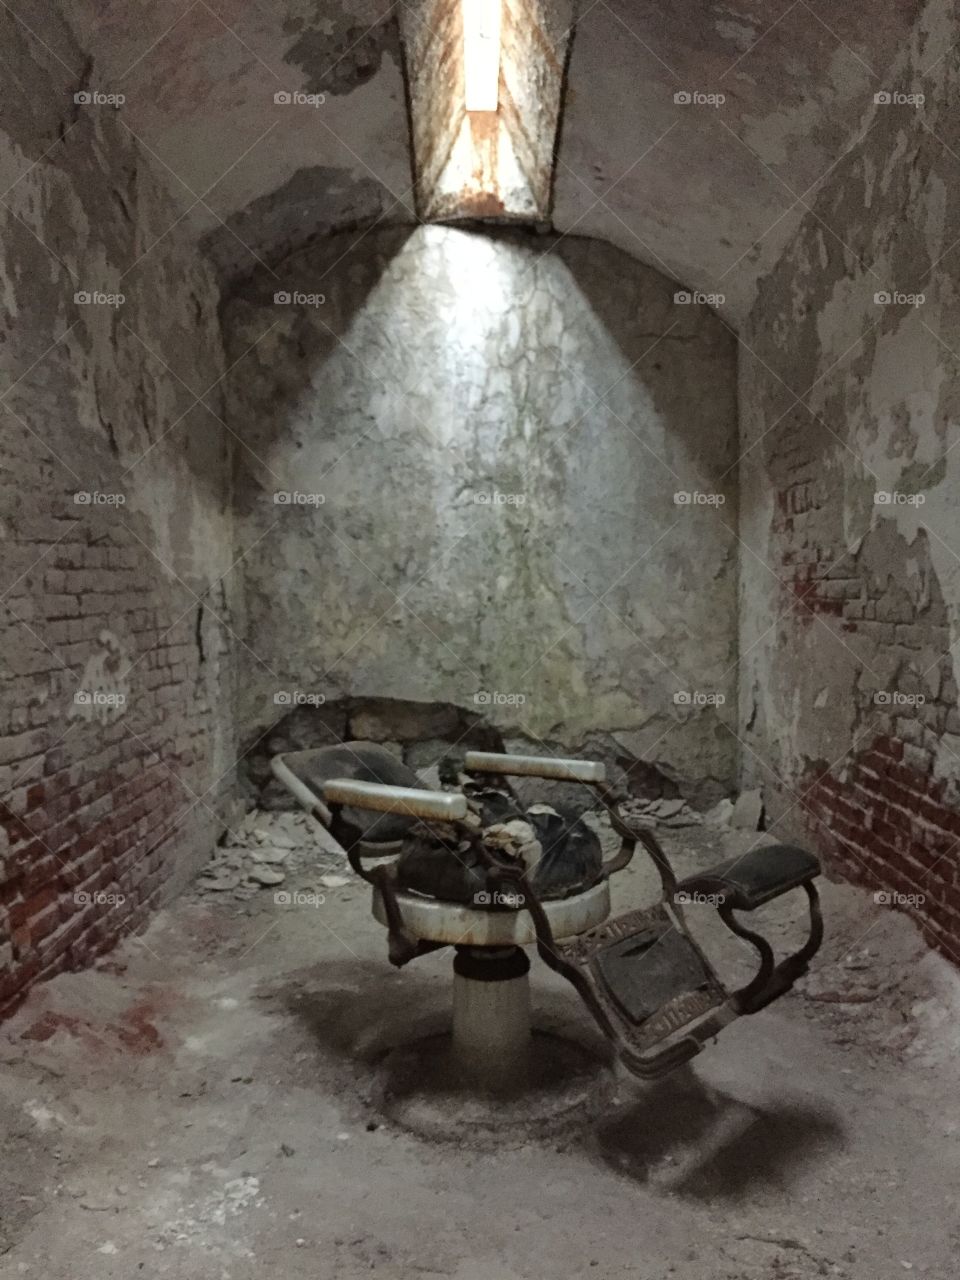 If this place isn't haunted, I don't know what is. Welcome to Eastern State Penitentiary. 